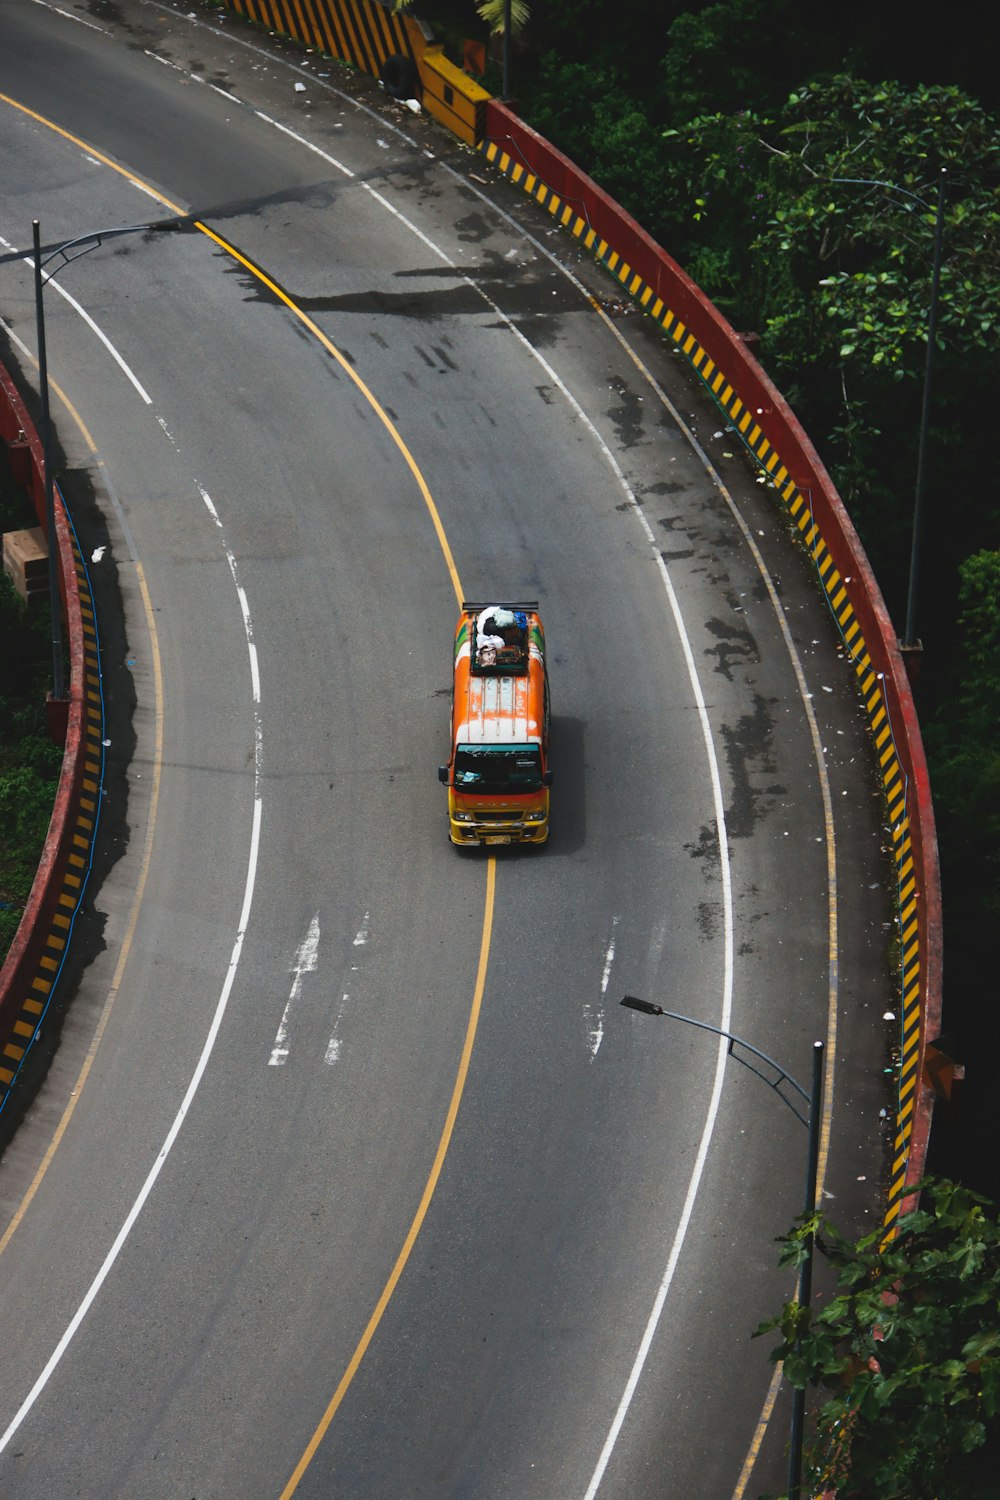 an orange and white bus driving down a curvy road